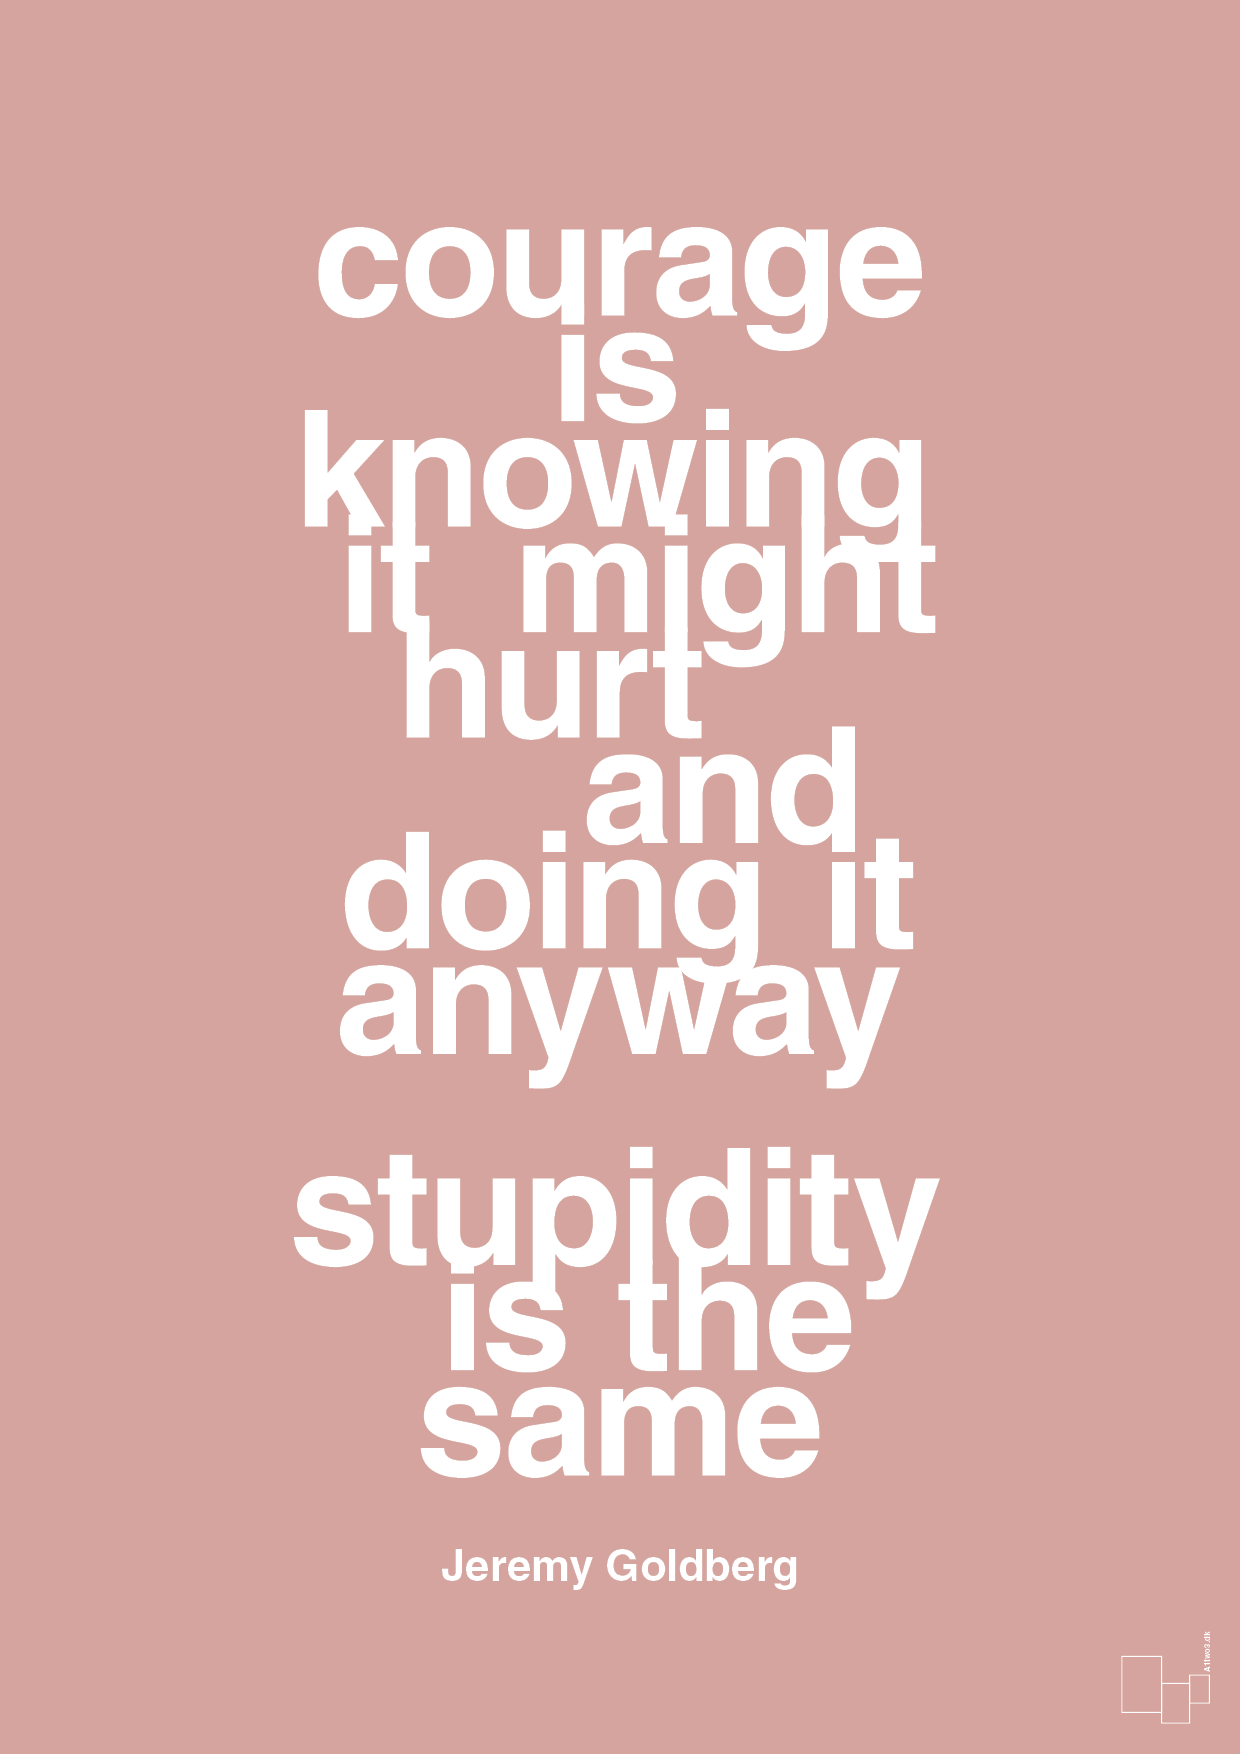 courage is knowing it might hurt and doing it anyway stupidity is the same - Plakat med Citater i Bubble Shell